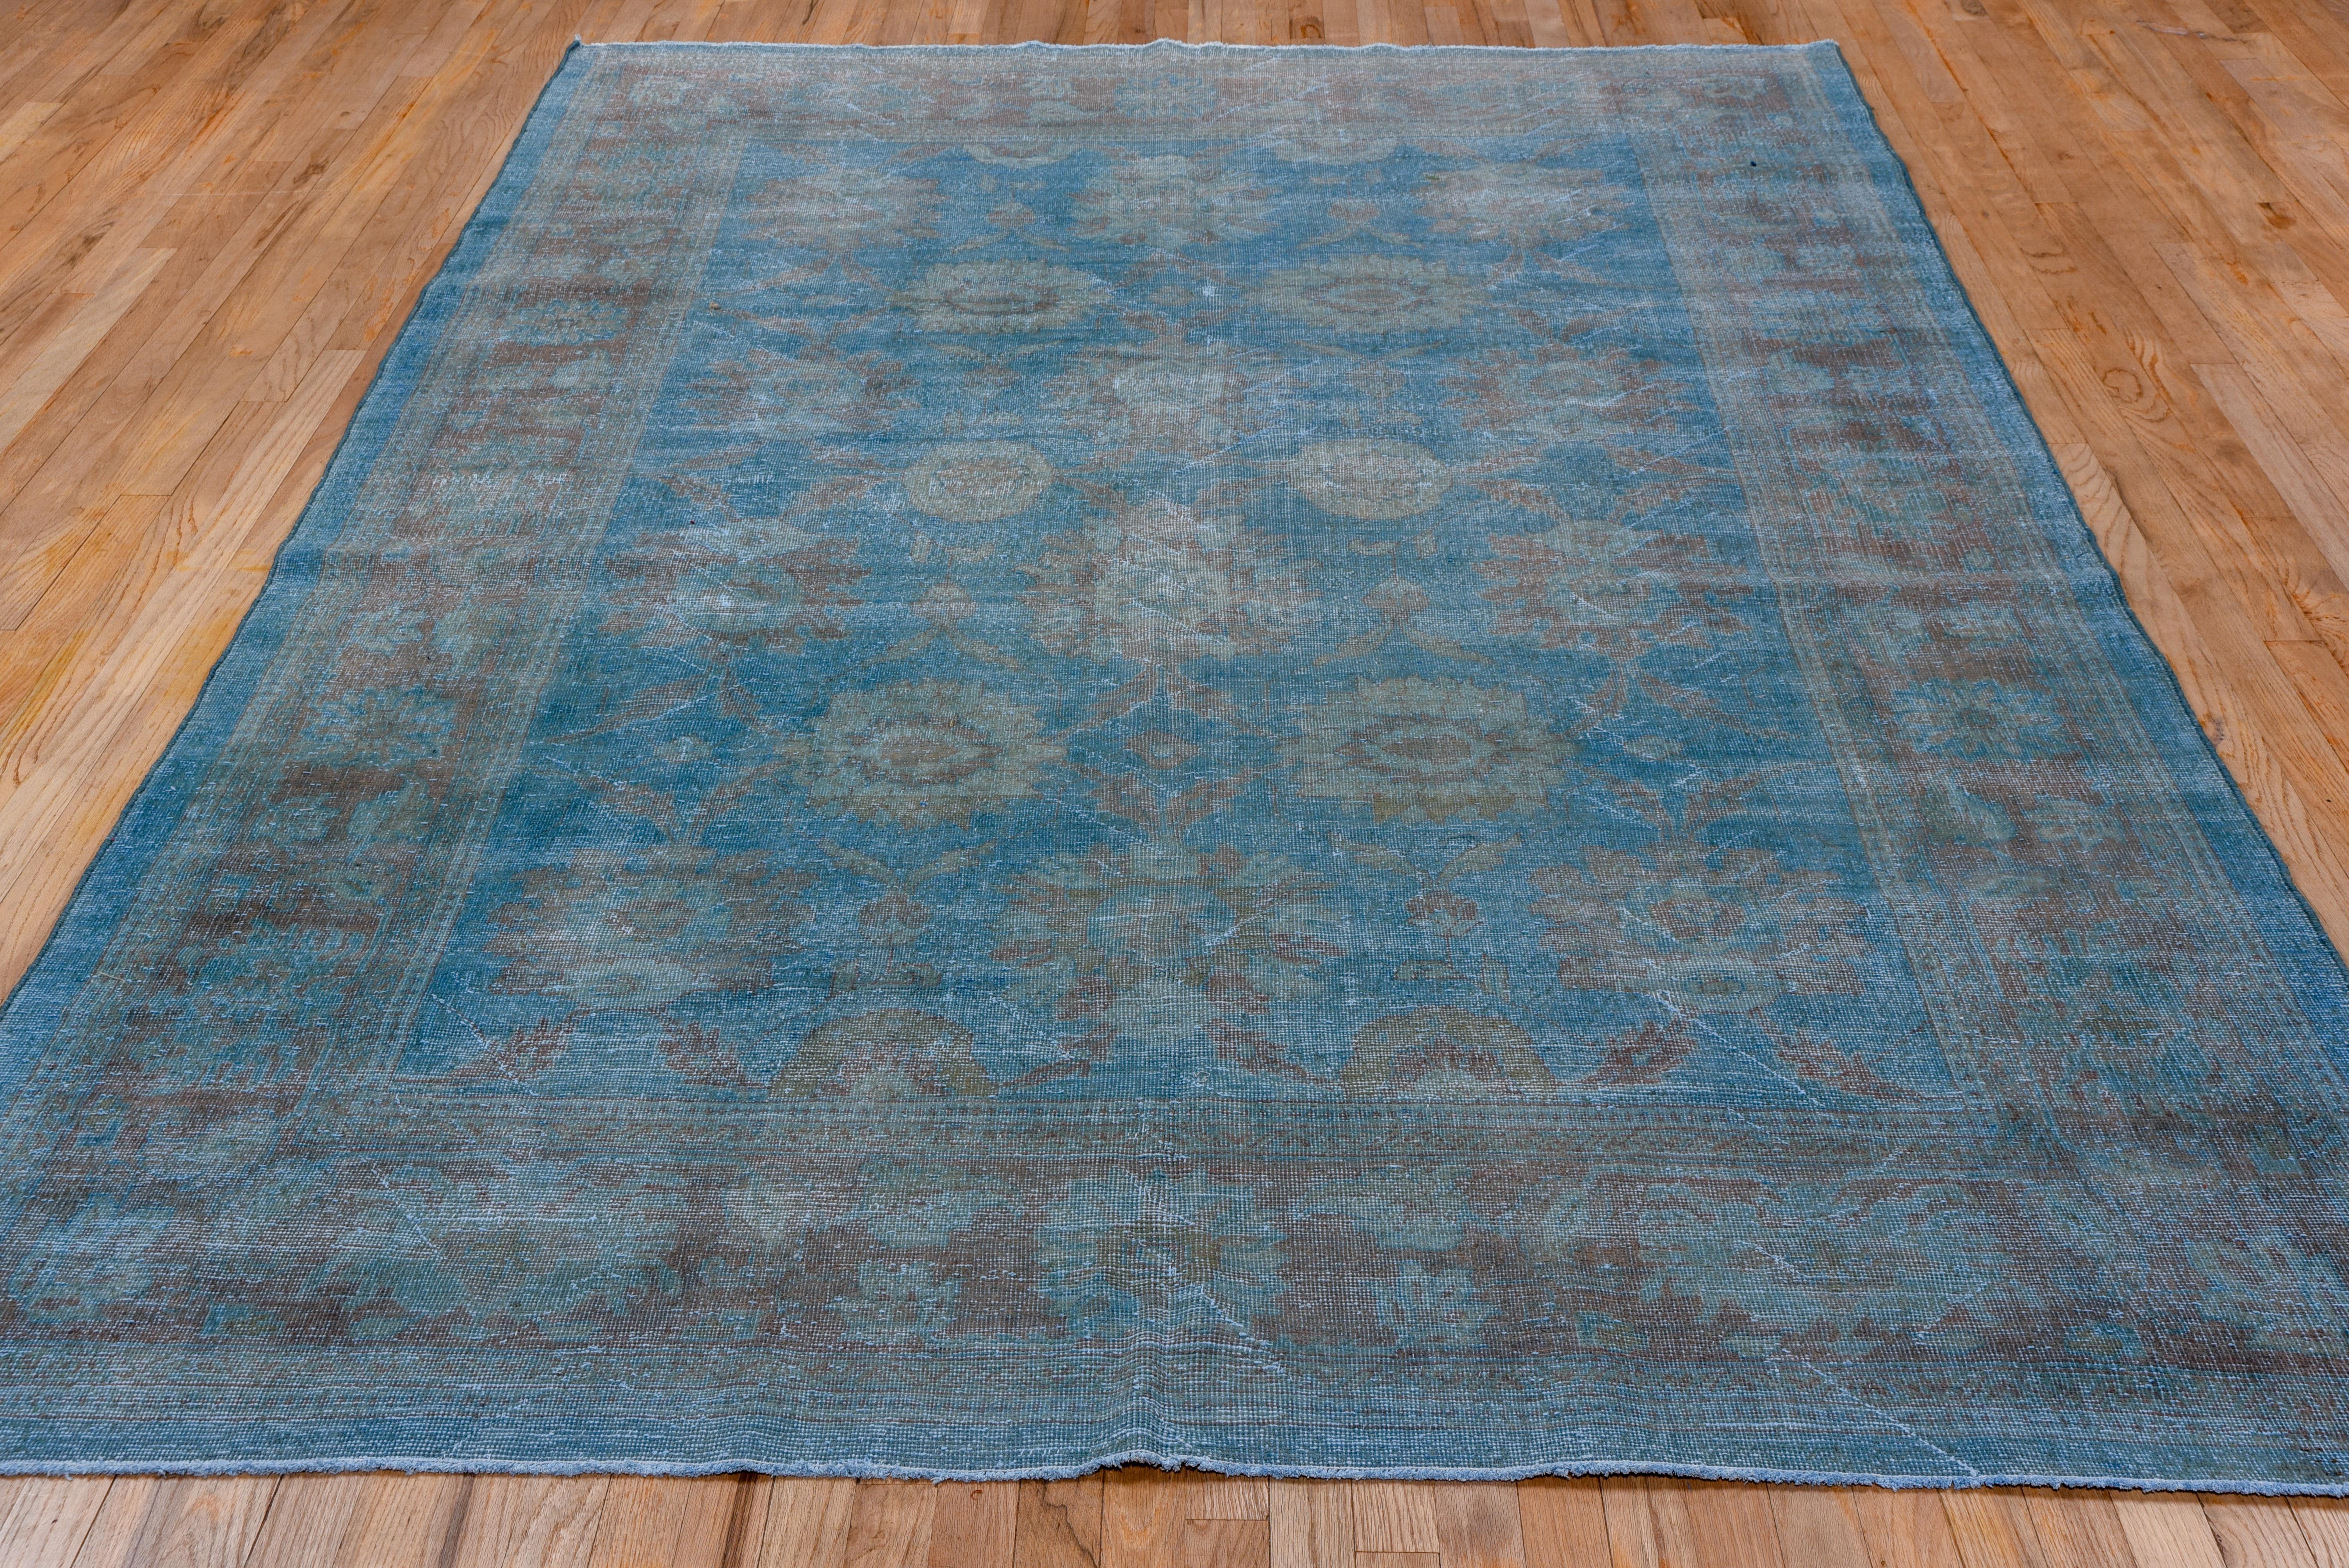 Antique Blue Persian Mahal Carpet In Good Condition For Sale In New York, NY